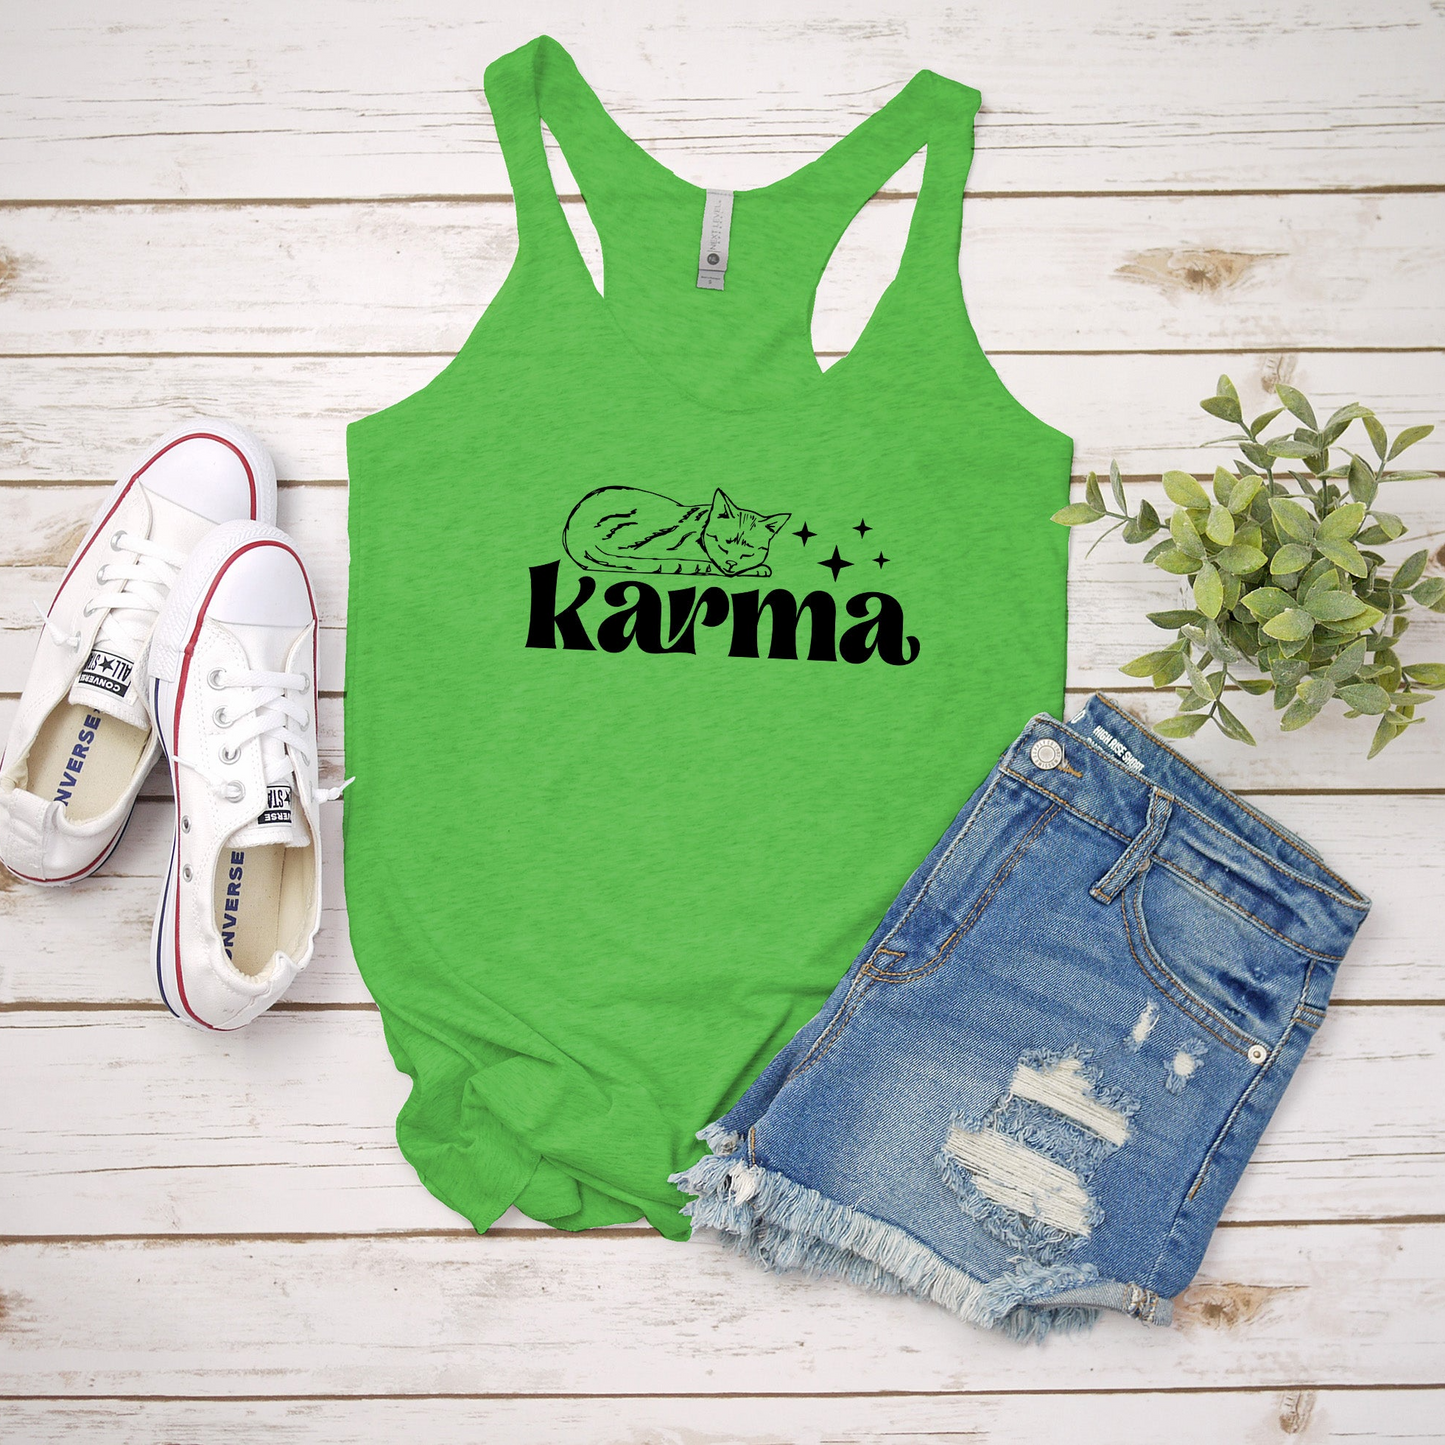 a green tank top that says karmia next to a pair of shorts